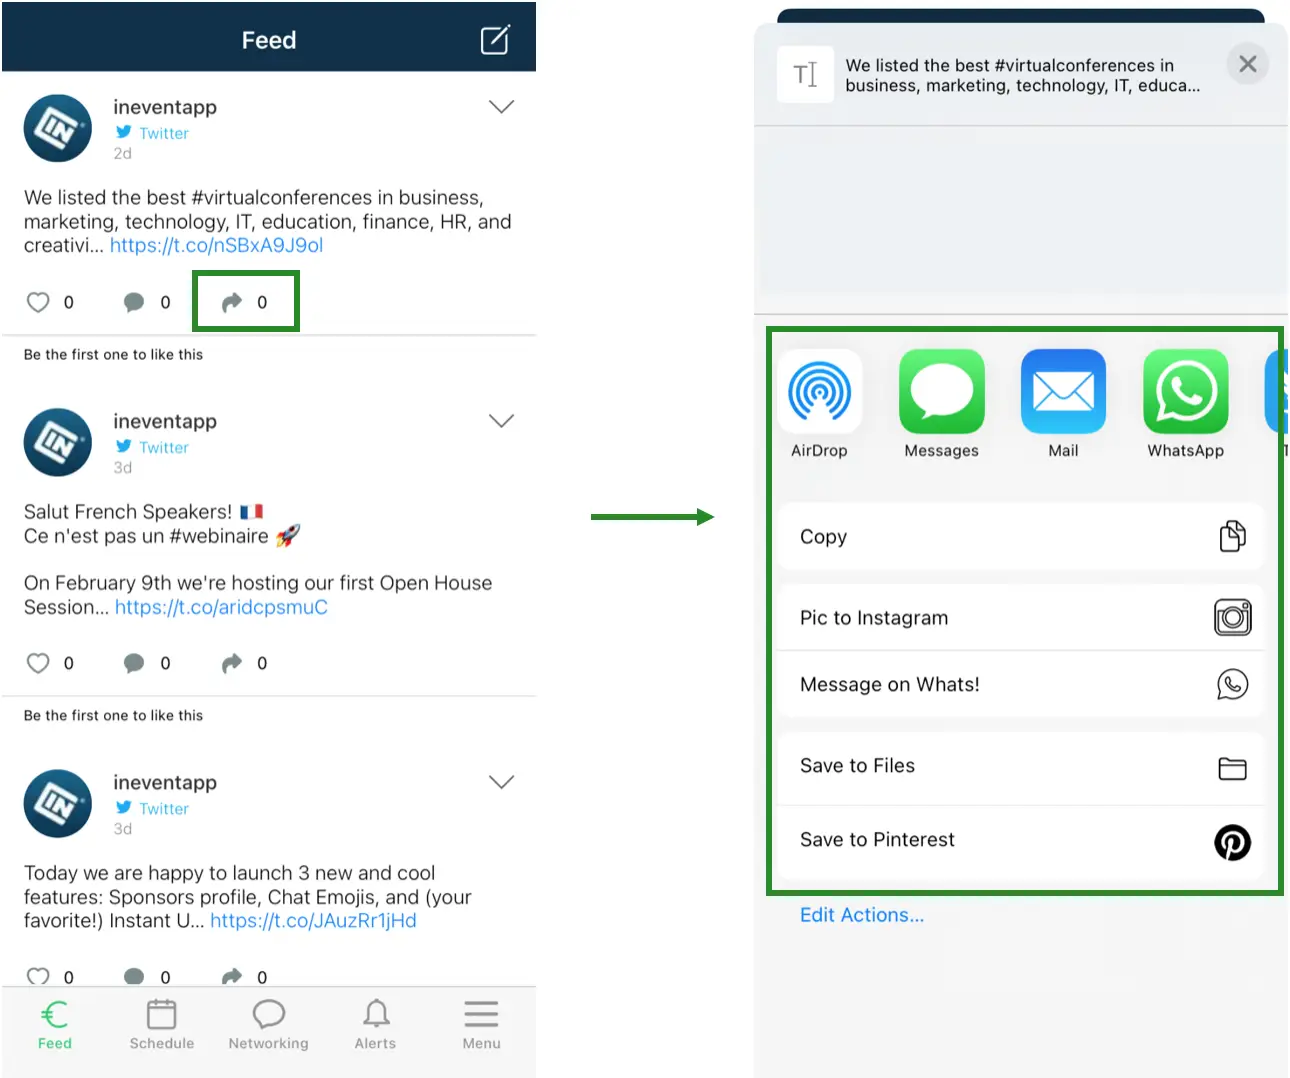 How to share content from the News Feed or the App Calendar/Schedule